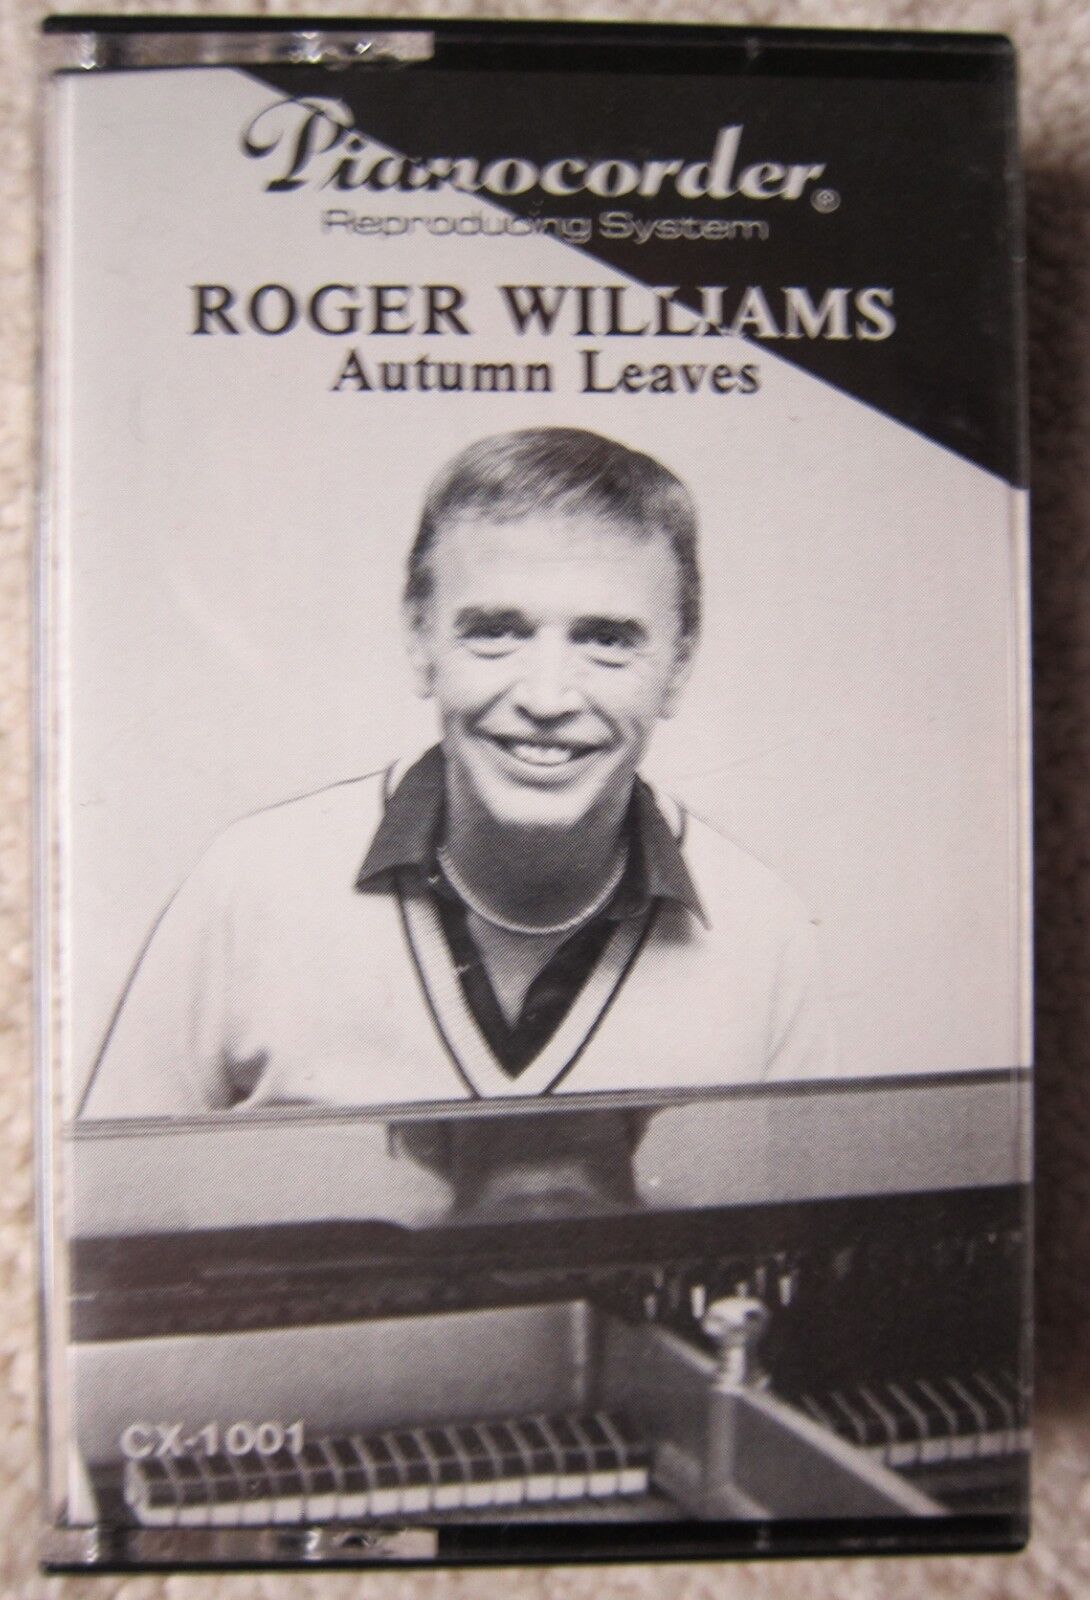 Pianocorder Reproducing System - Roger Williams Autumn Leaves Cassette Tape